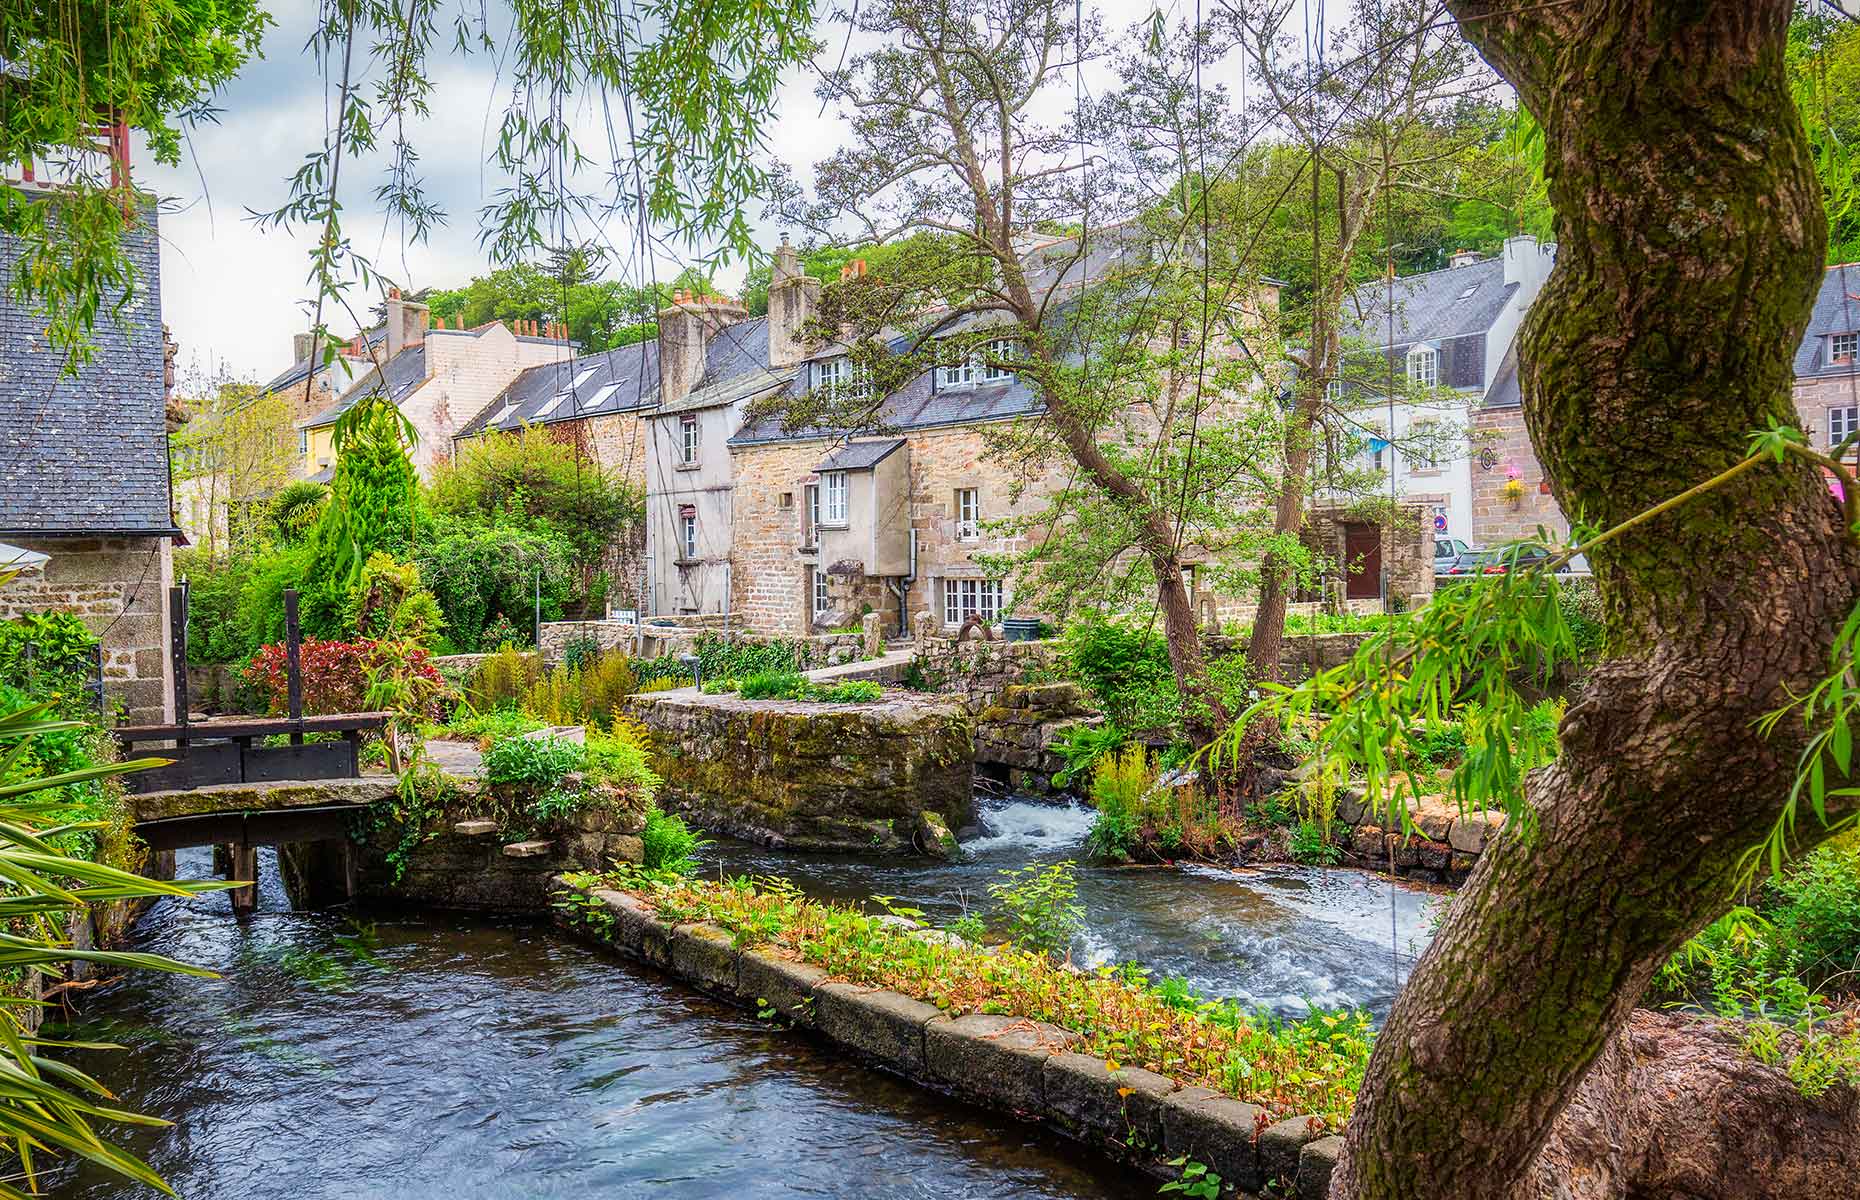 Pont Aven's river and cottages, Brittany, France (Image: DaLiu/Shutterstock)